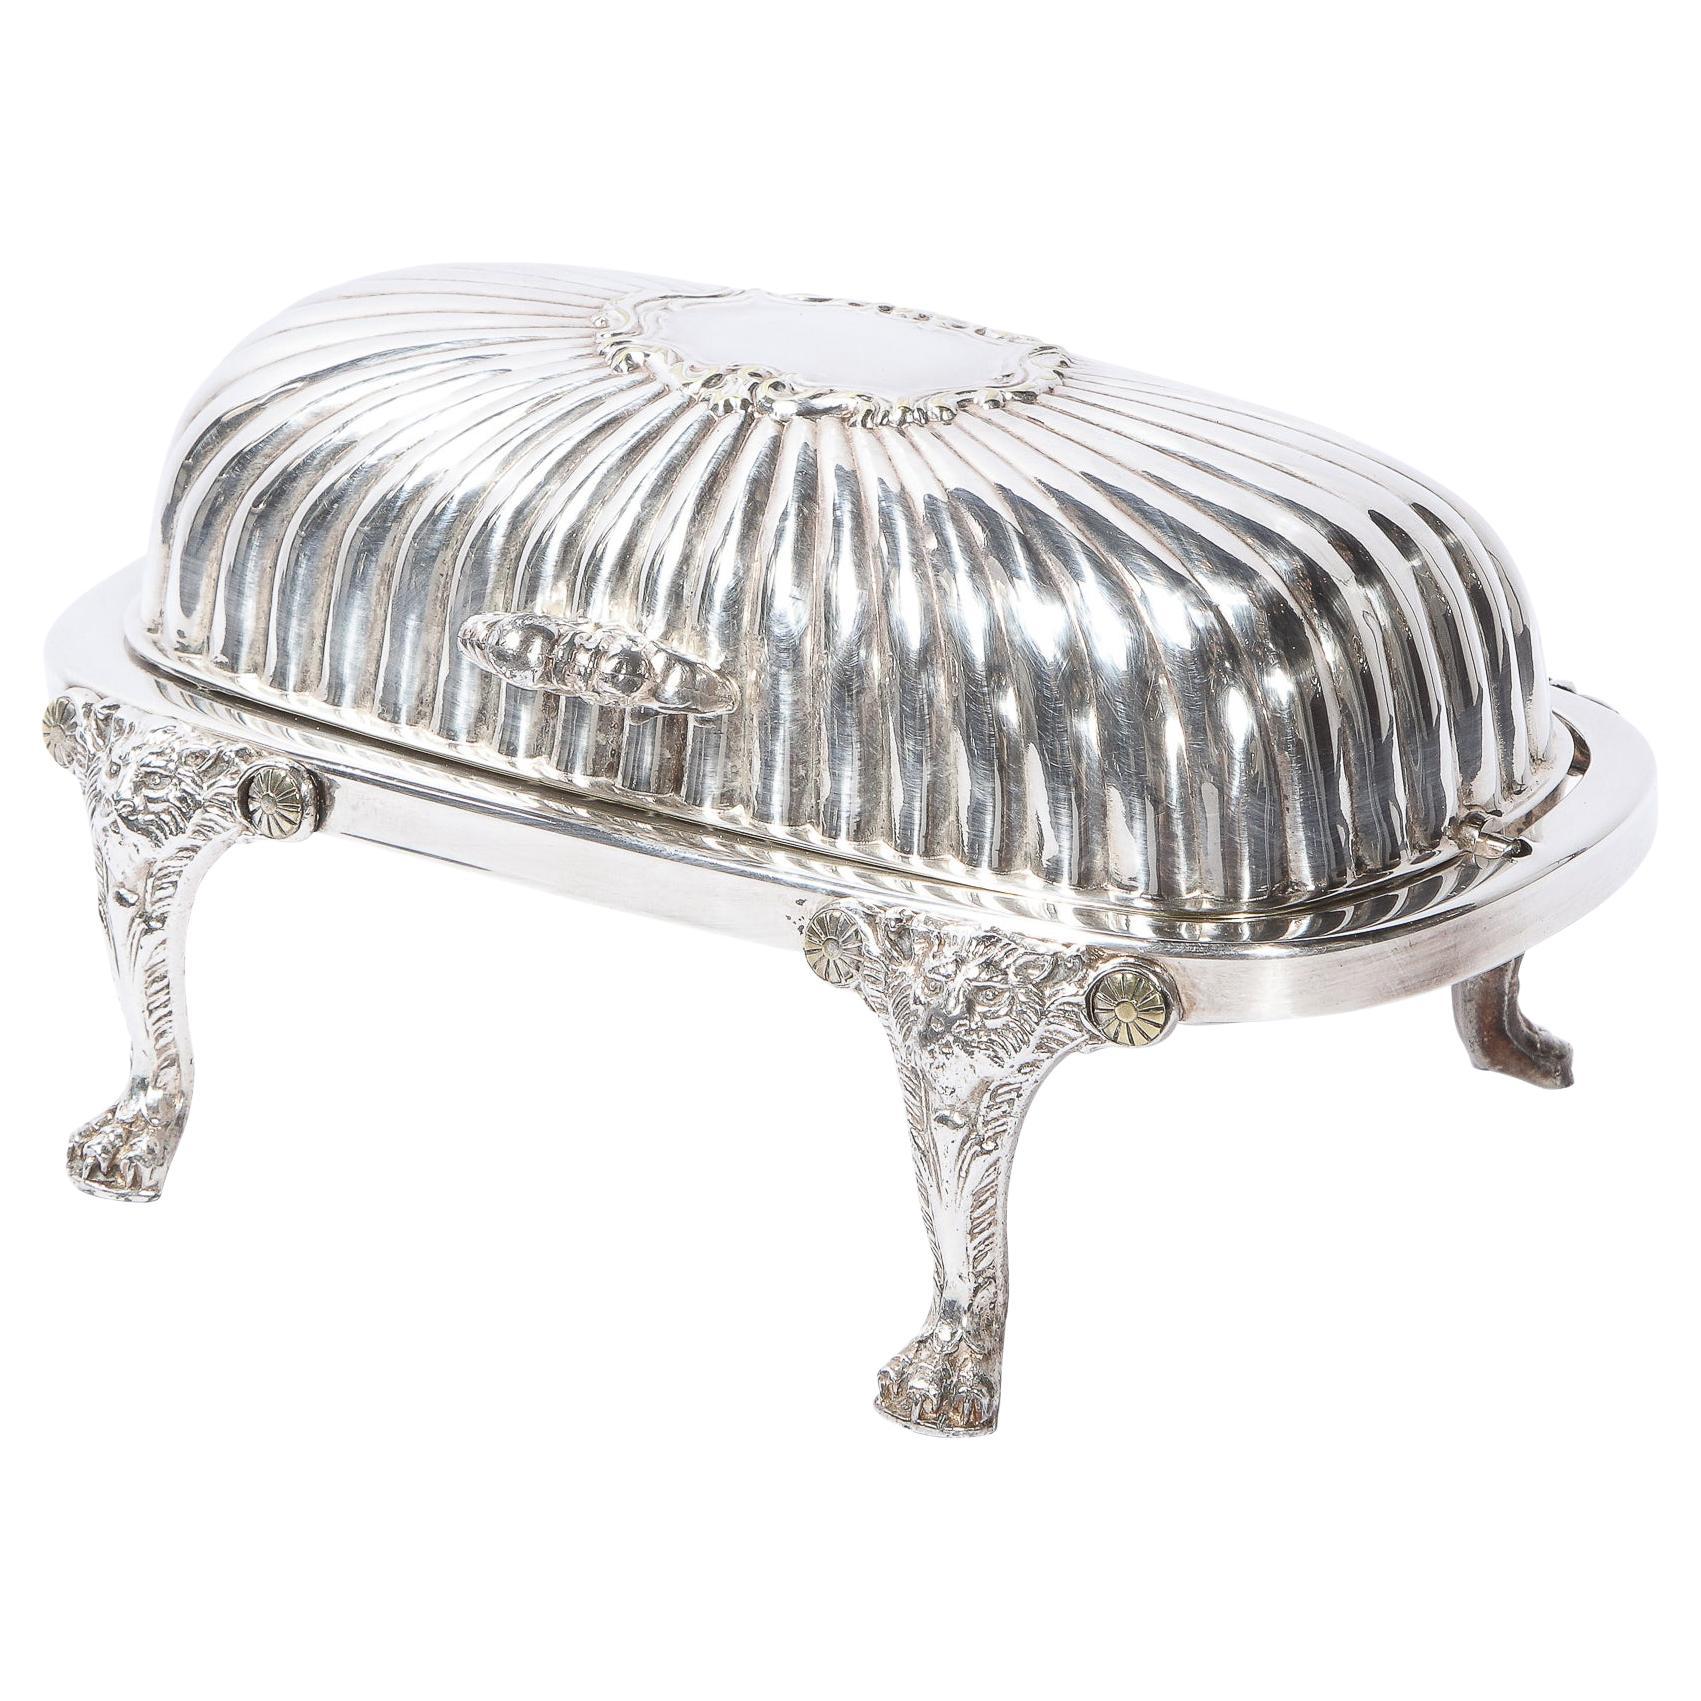 Mid-Century Modern Channeled Neoclassical Style Silverplate Butter Dish